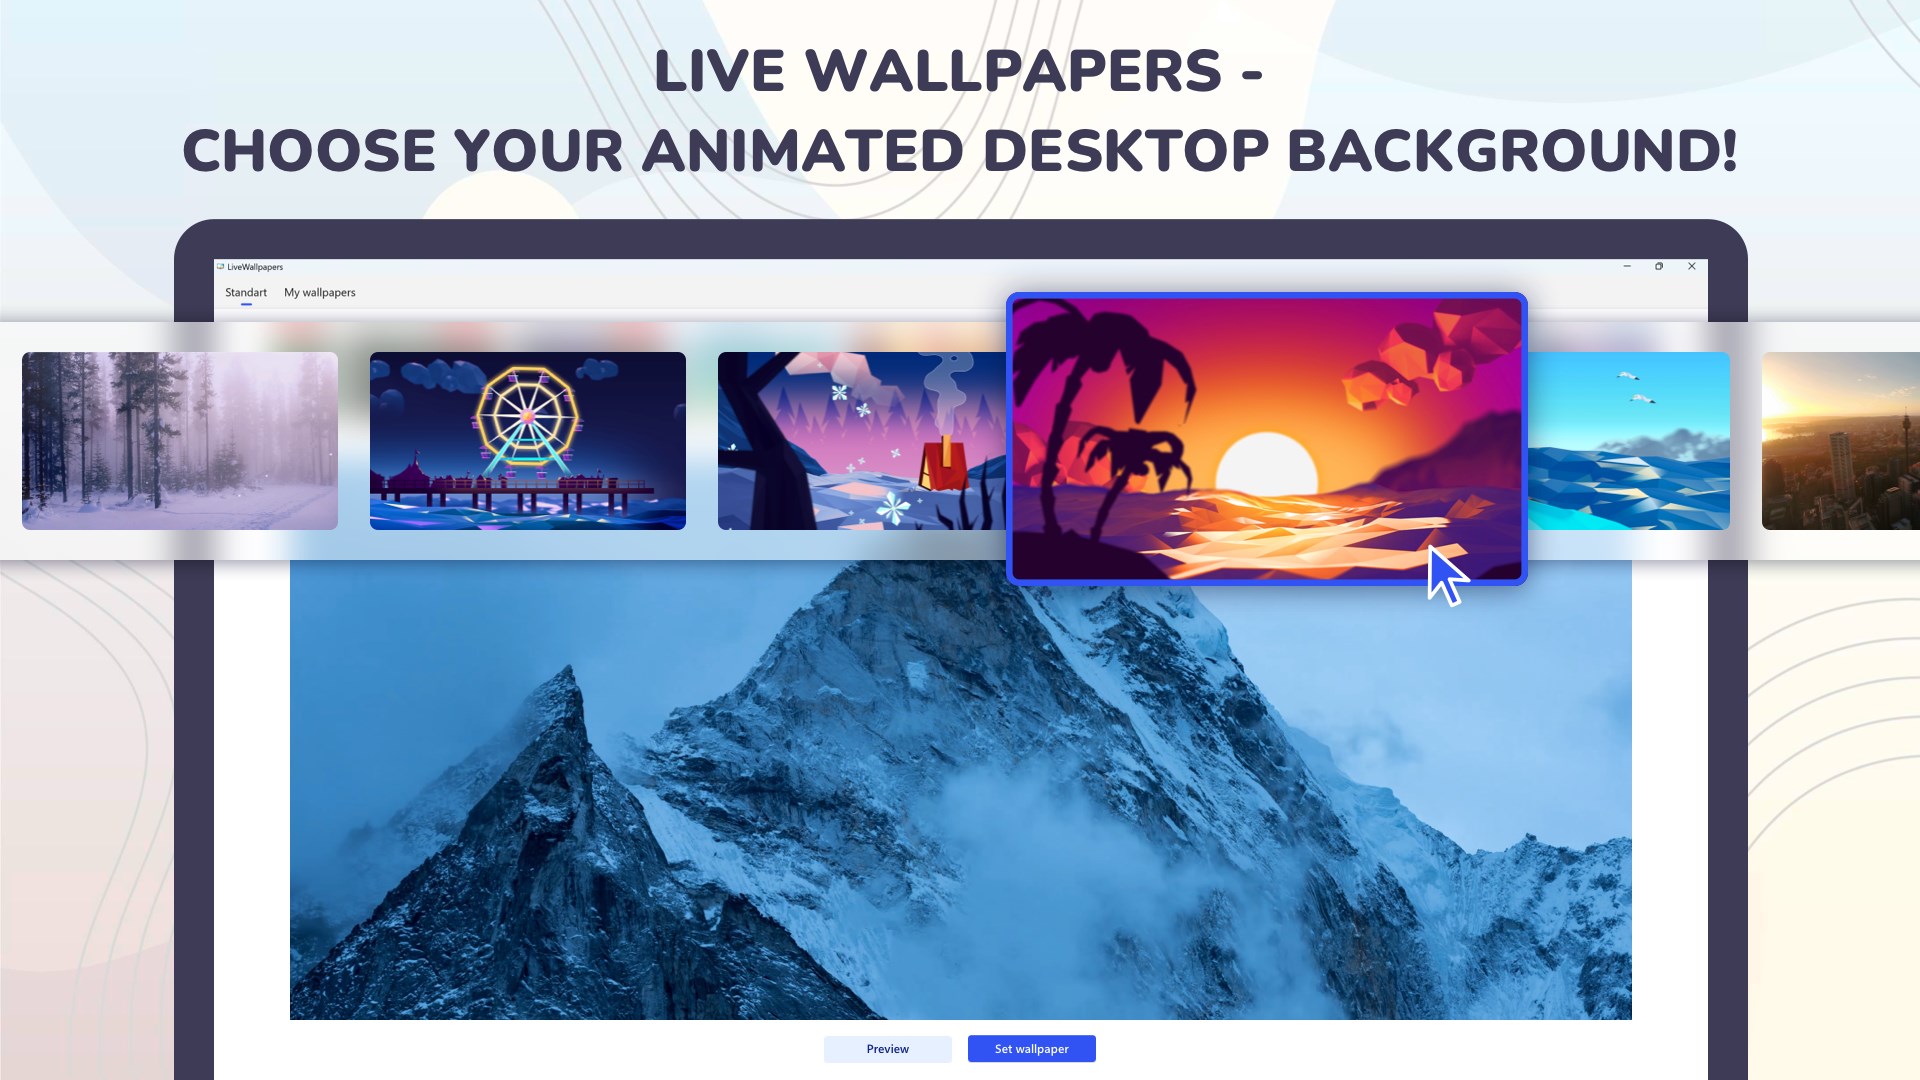 How to Set Live Wallpapers & Animated Desktop Backgrounds in